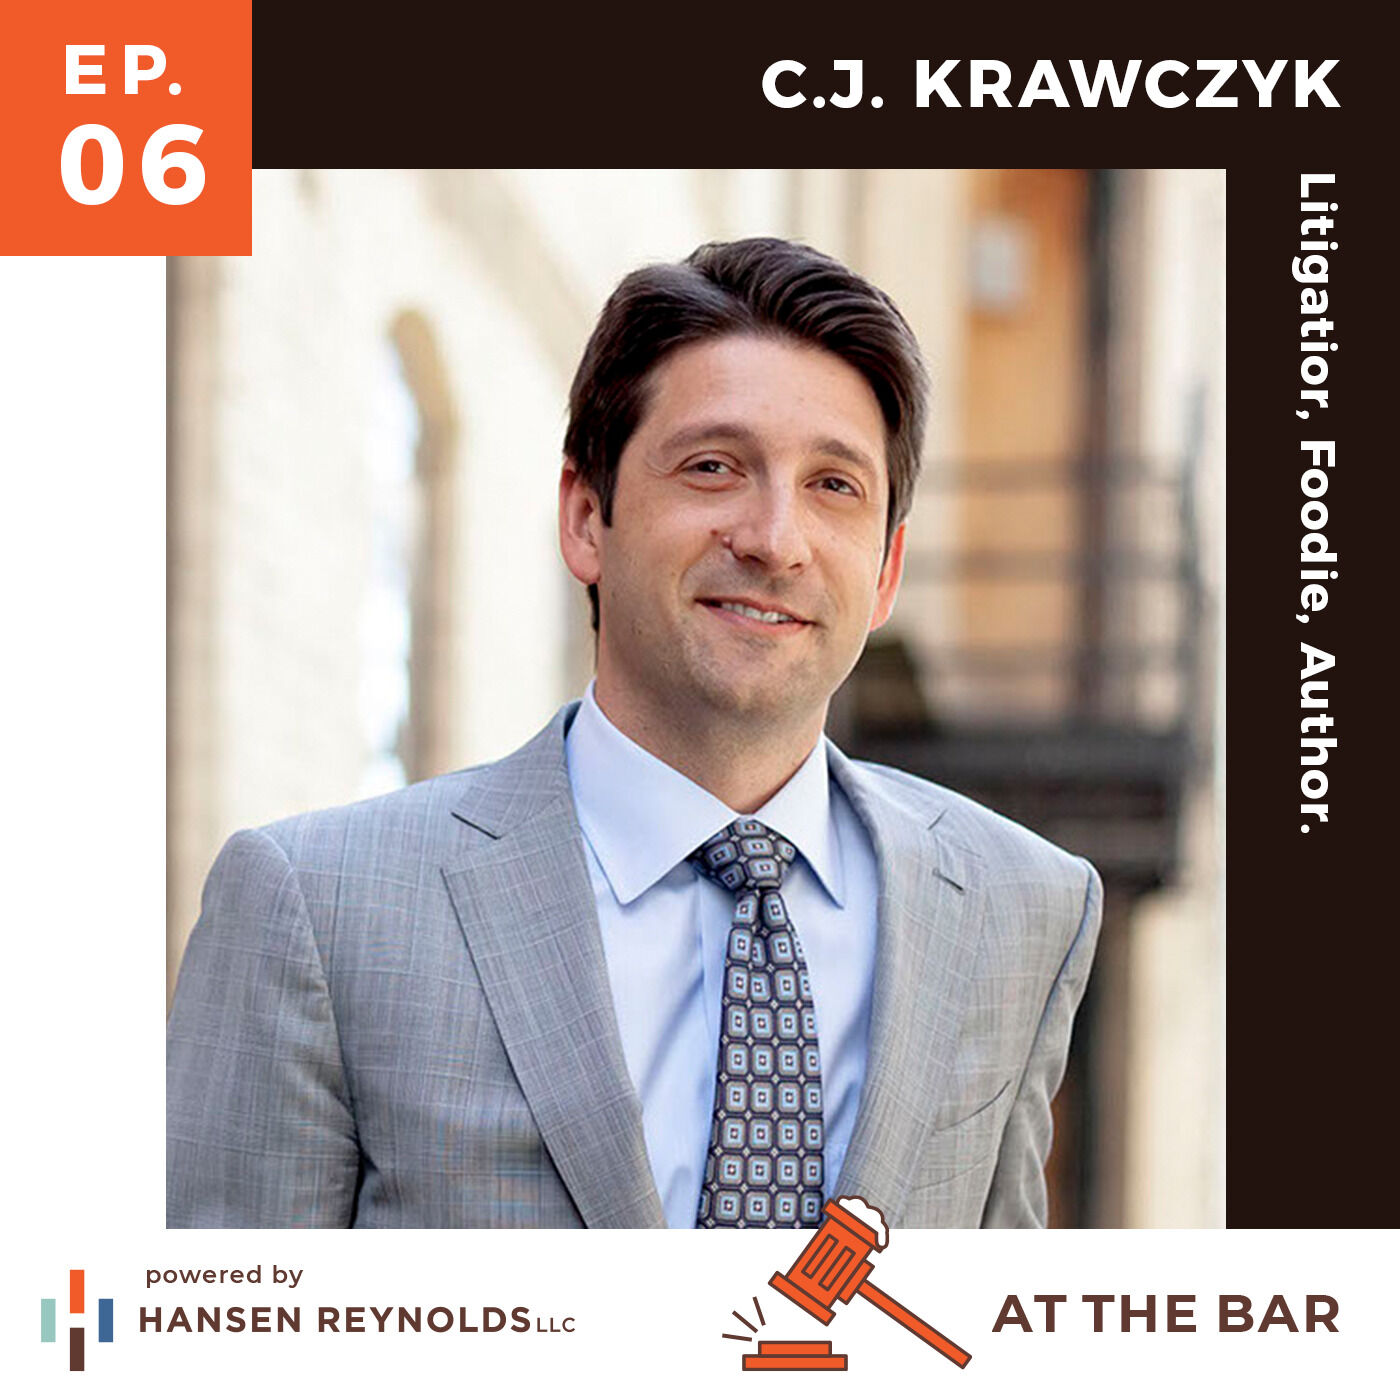 At the Bar episode six cover with C.J. Krawczyk